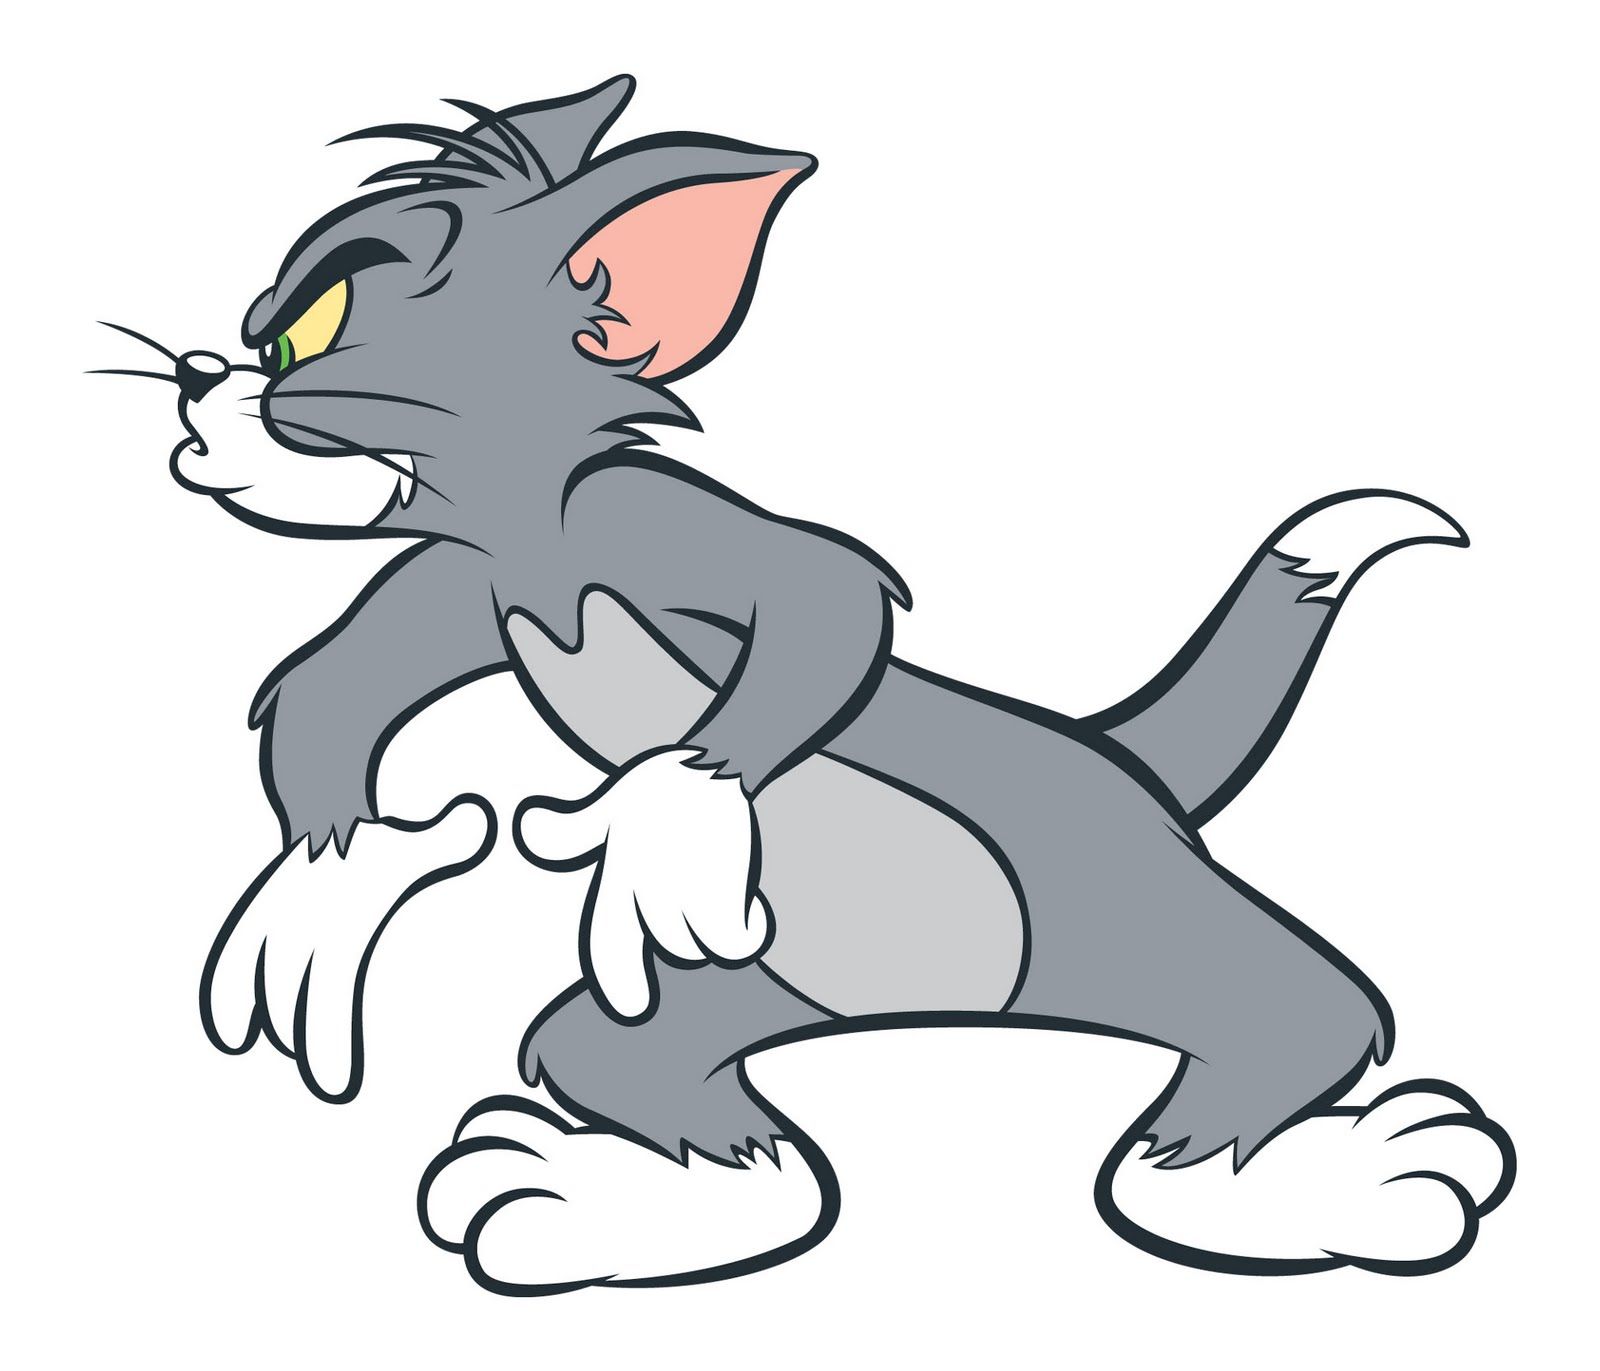 21-facts-about-tom-cat-tom-and-jerry